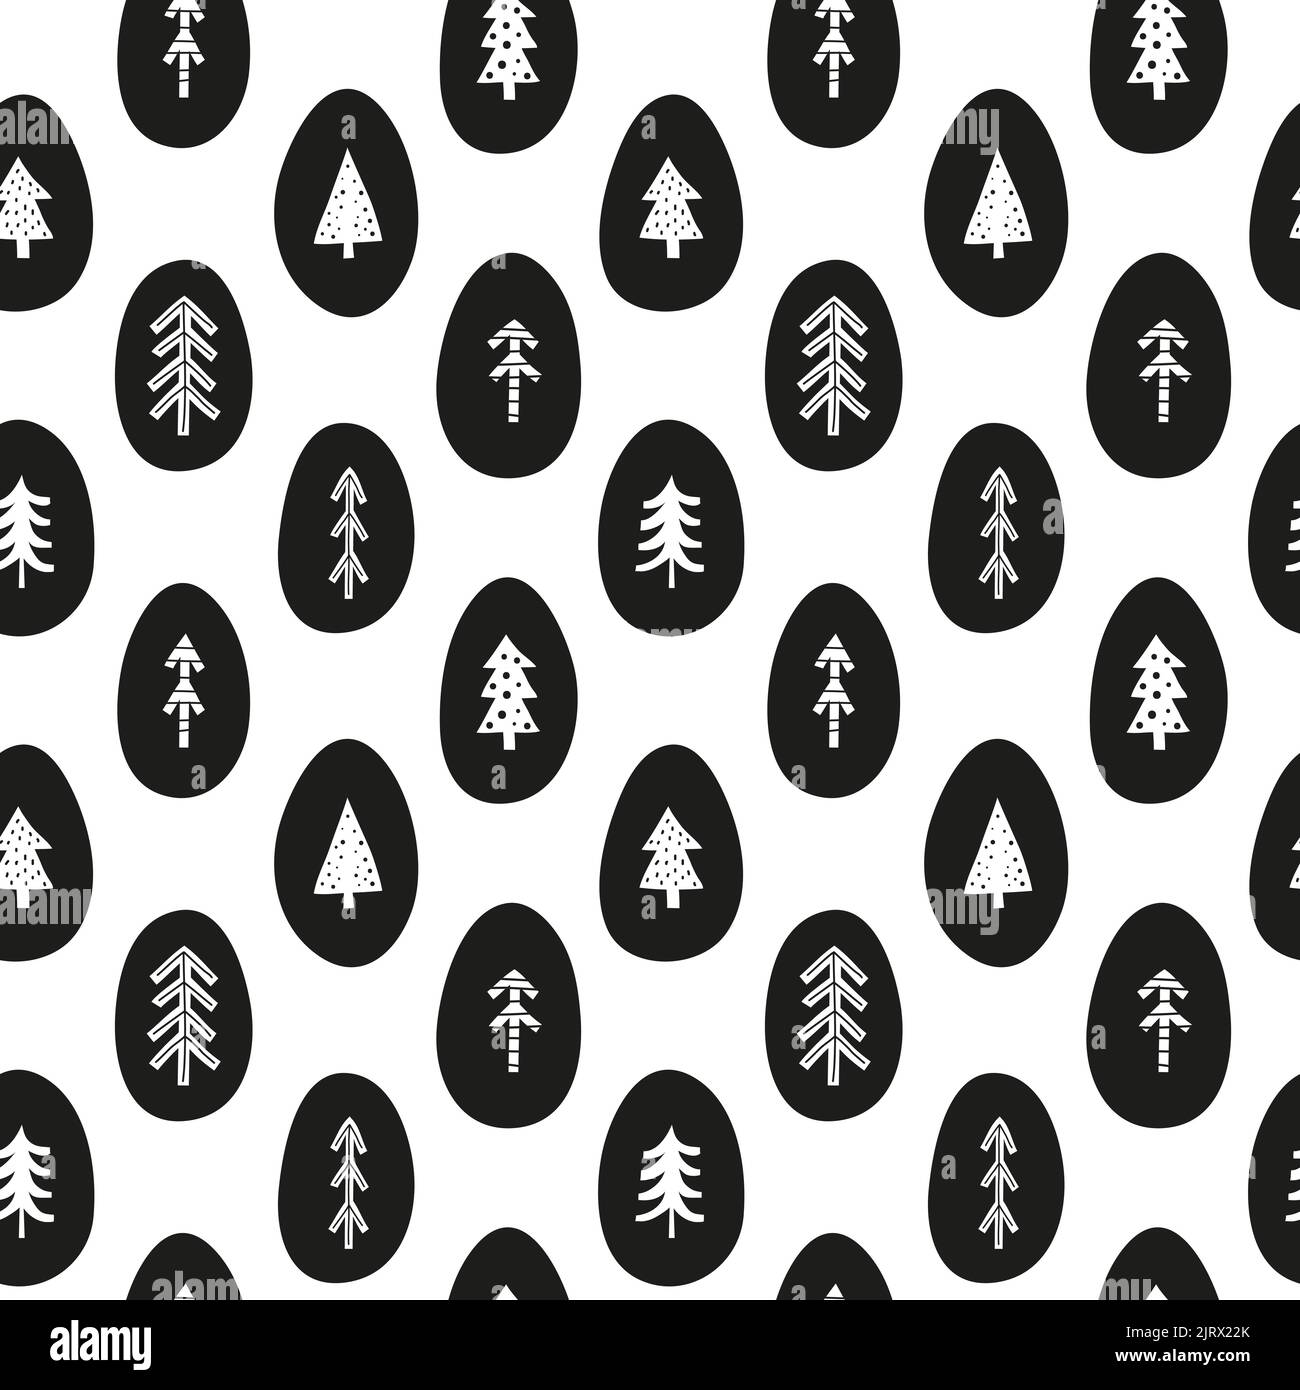 Black and white seamless pattern with doodle Scandinavian folk fir or pine trees in eggs. Minimalist Nordic style. Stock Vector